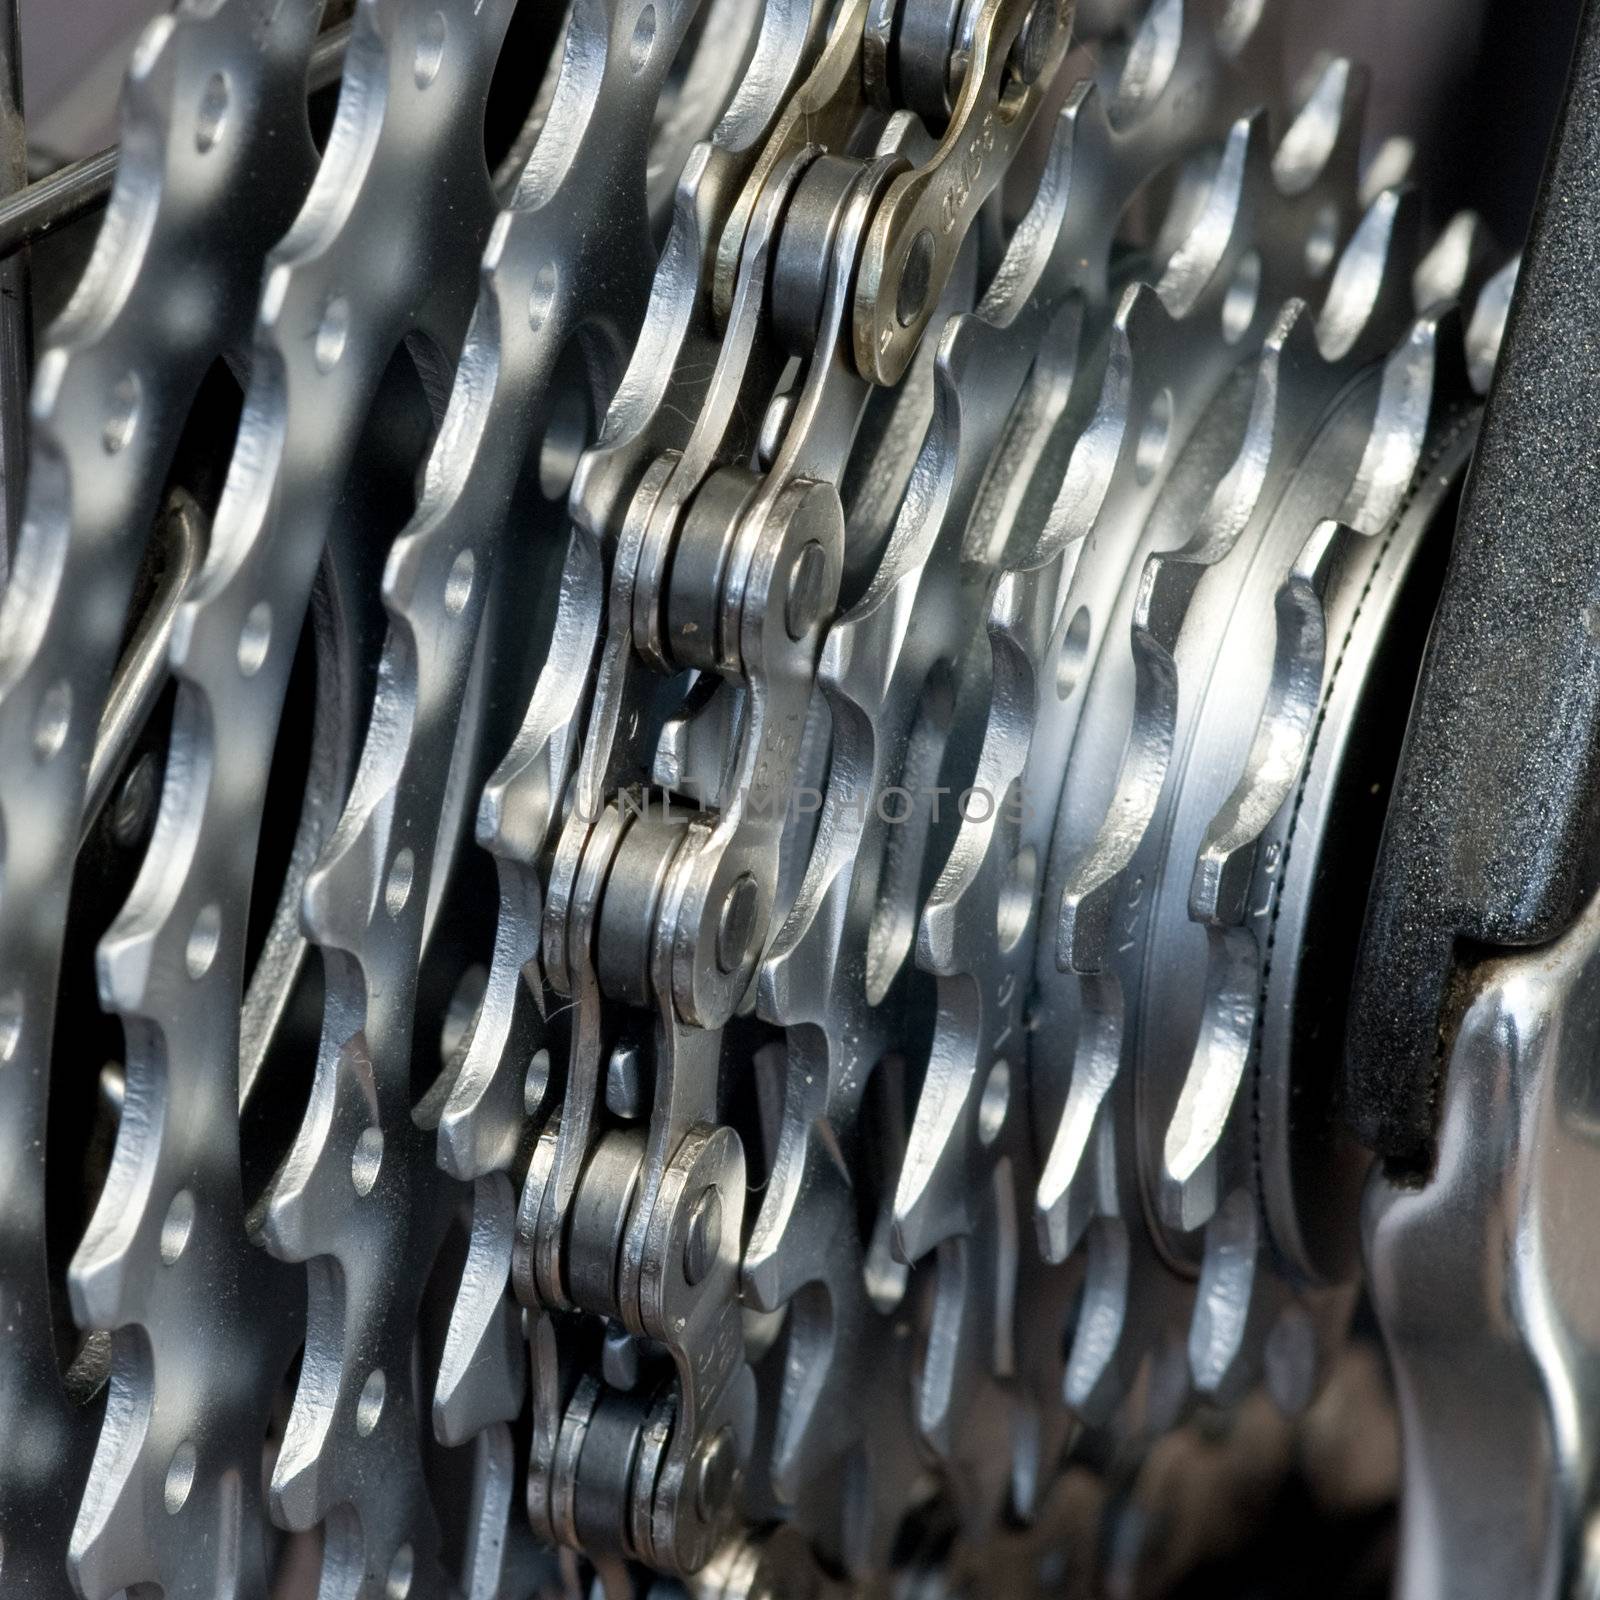 Rear MTB cassette with chain by naumoid